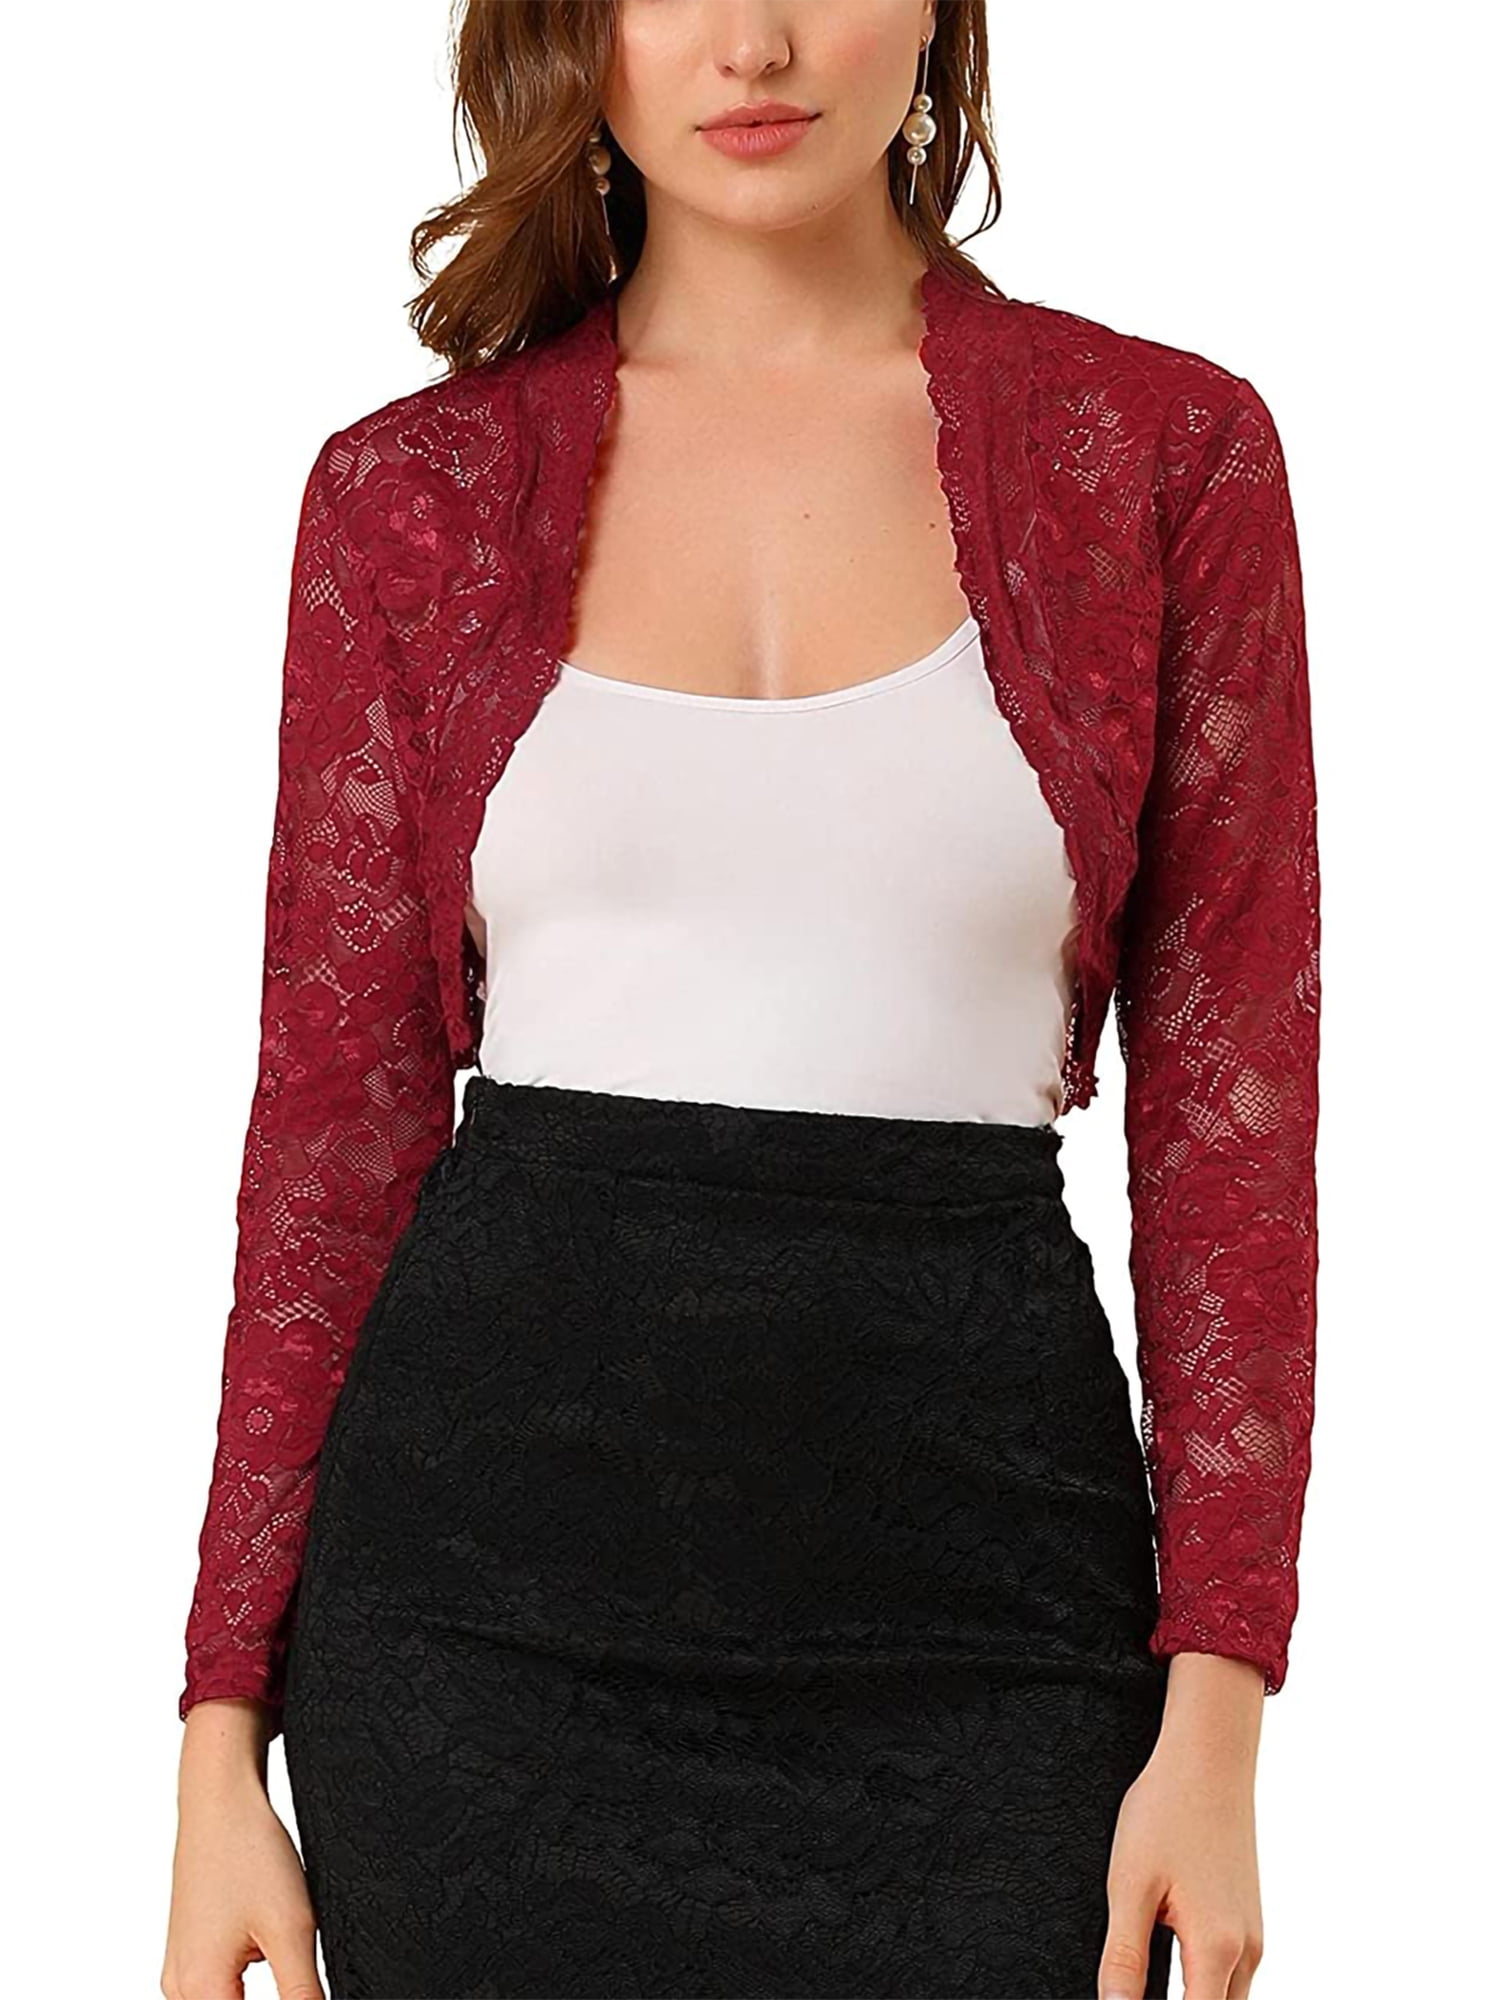 New Ladies Floral Lace Long Sleeve Open Front Bolero Shrug Crop Cardigan Top 